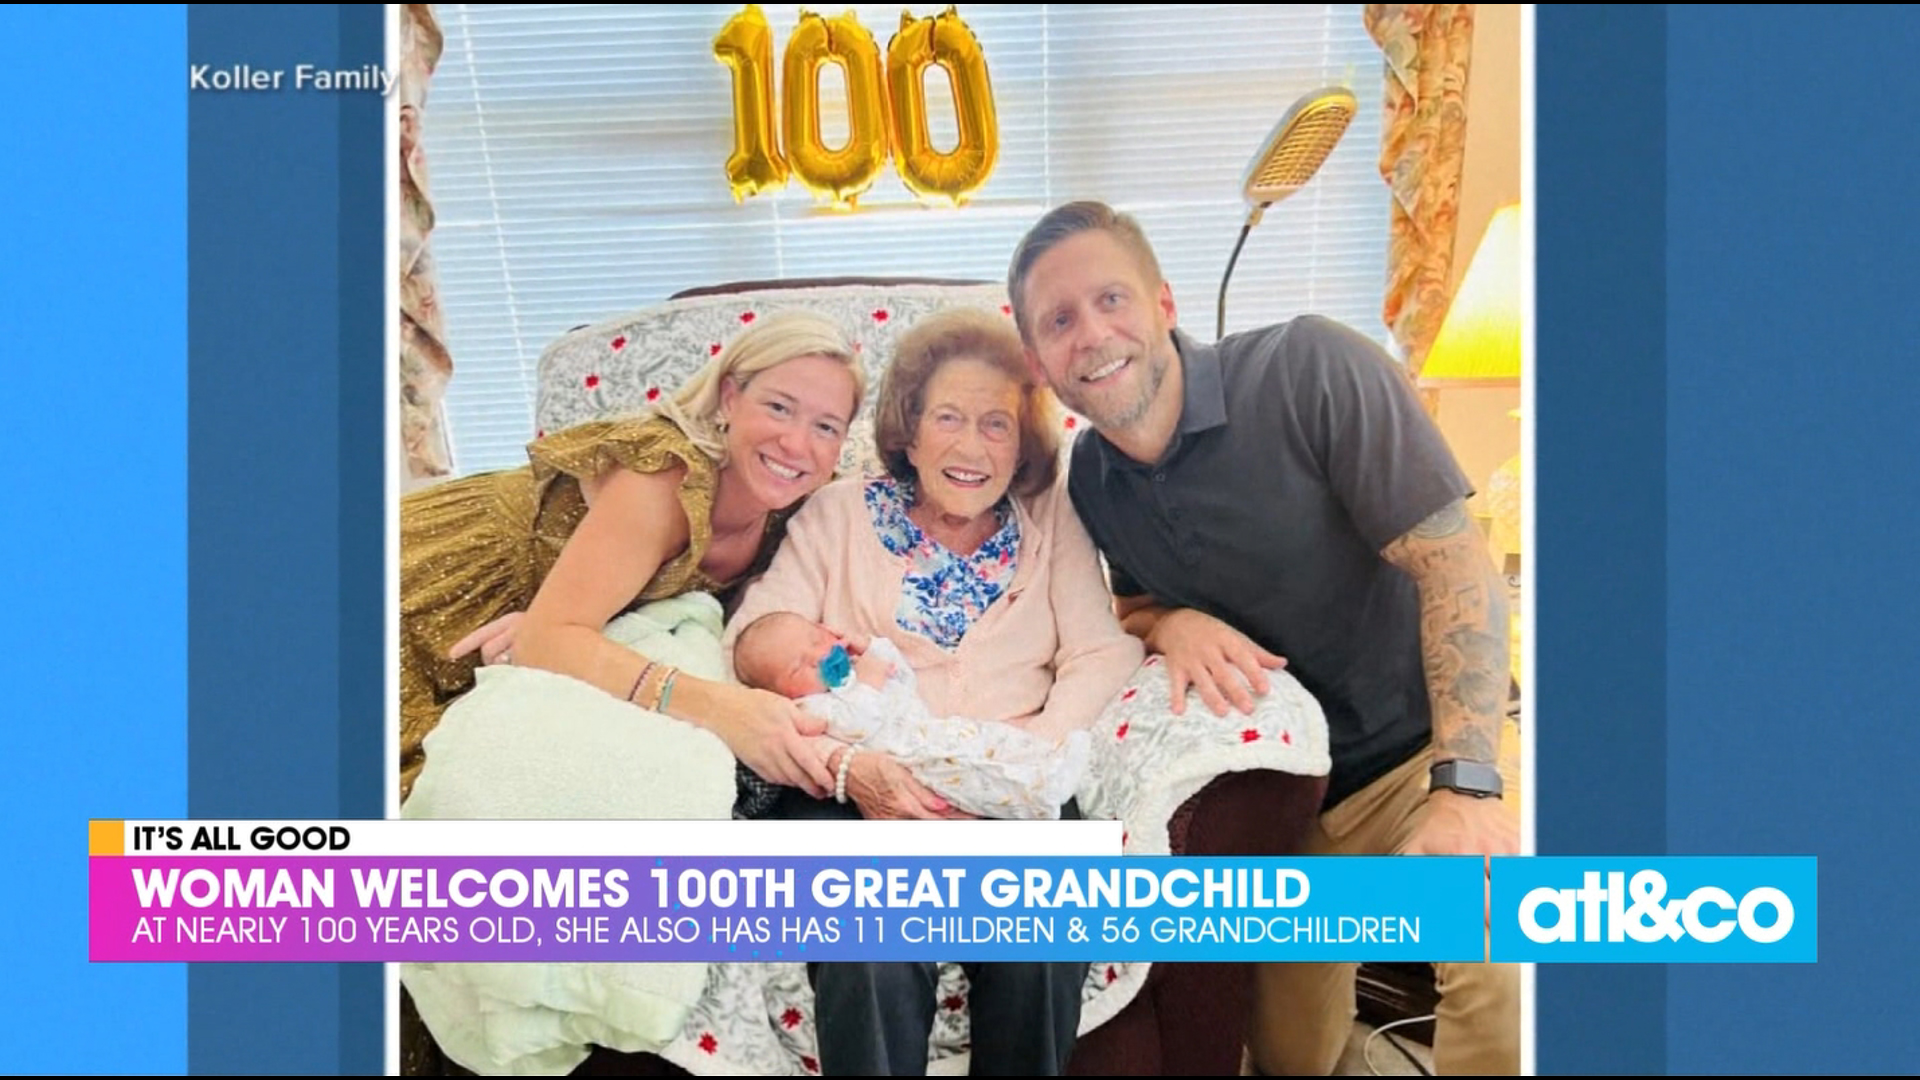 At nearly 100 years old, this great-grandma has 100 great-grandchildren, 56 grandchildren, and 11 kids of her own.